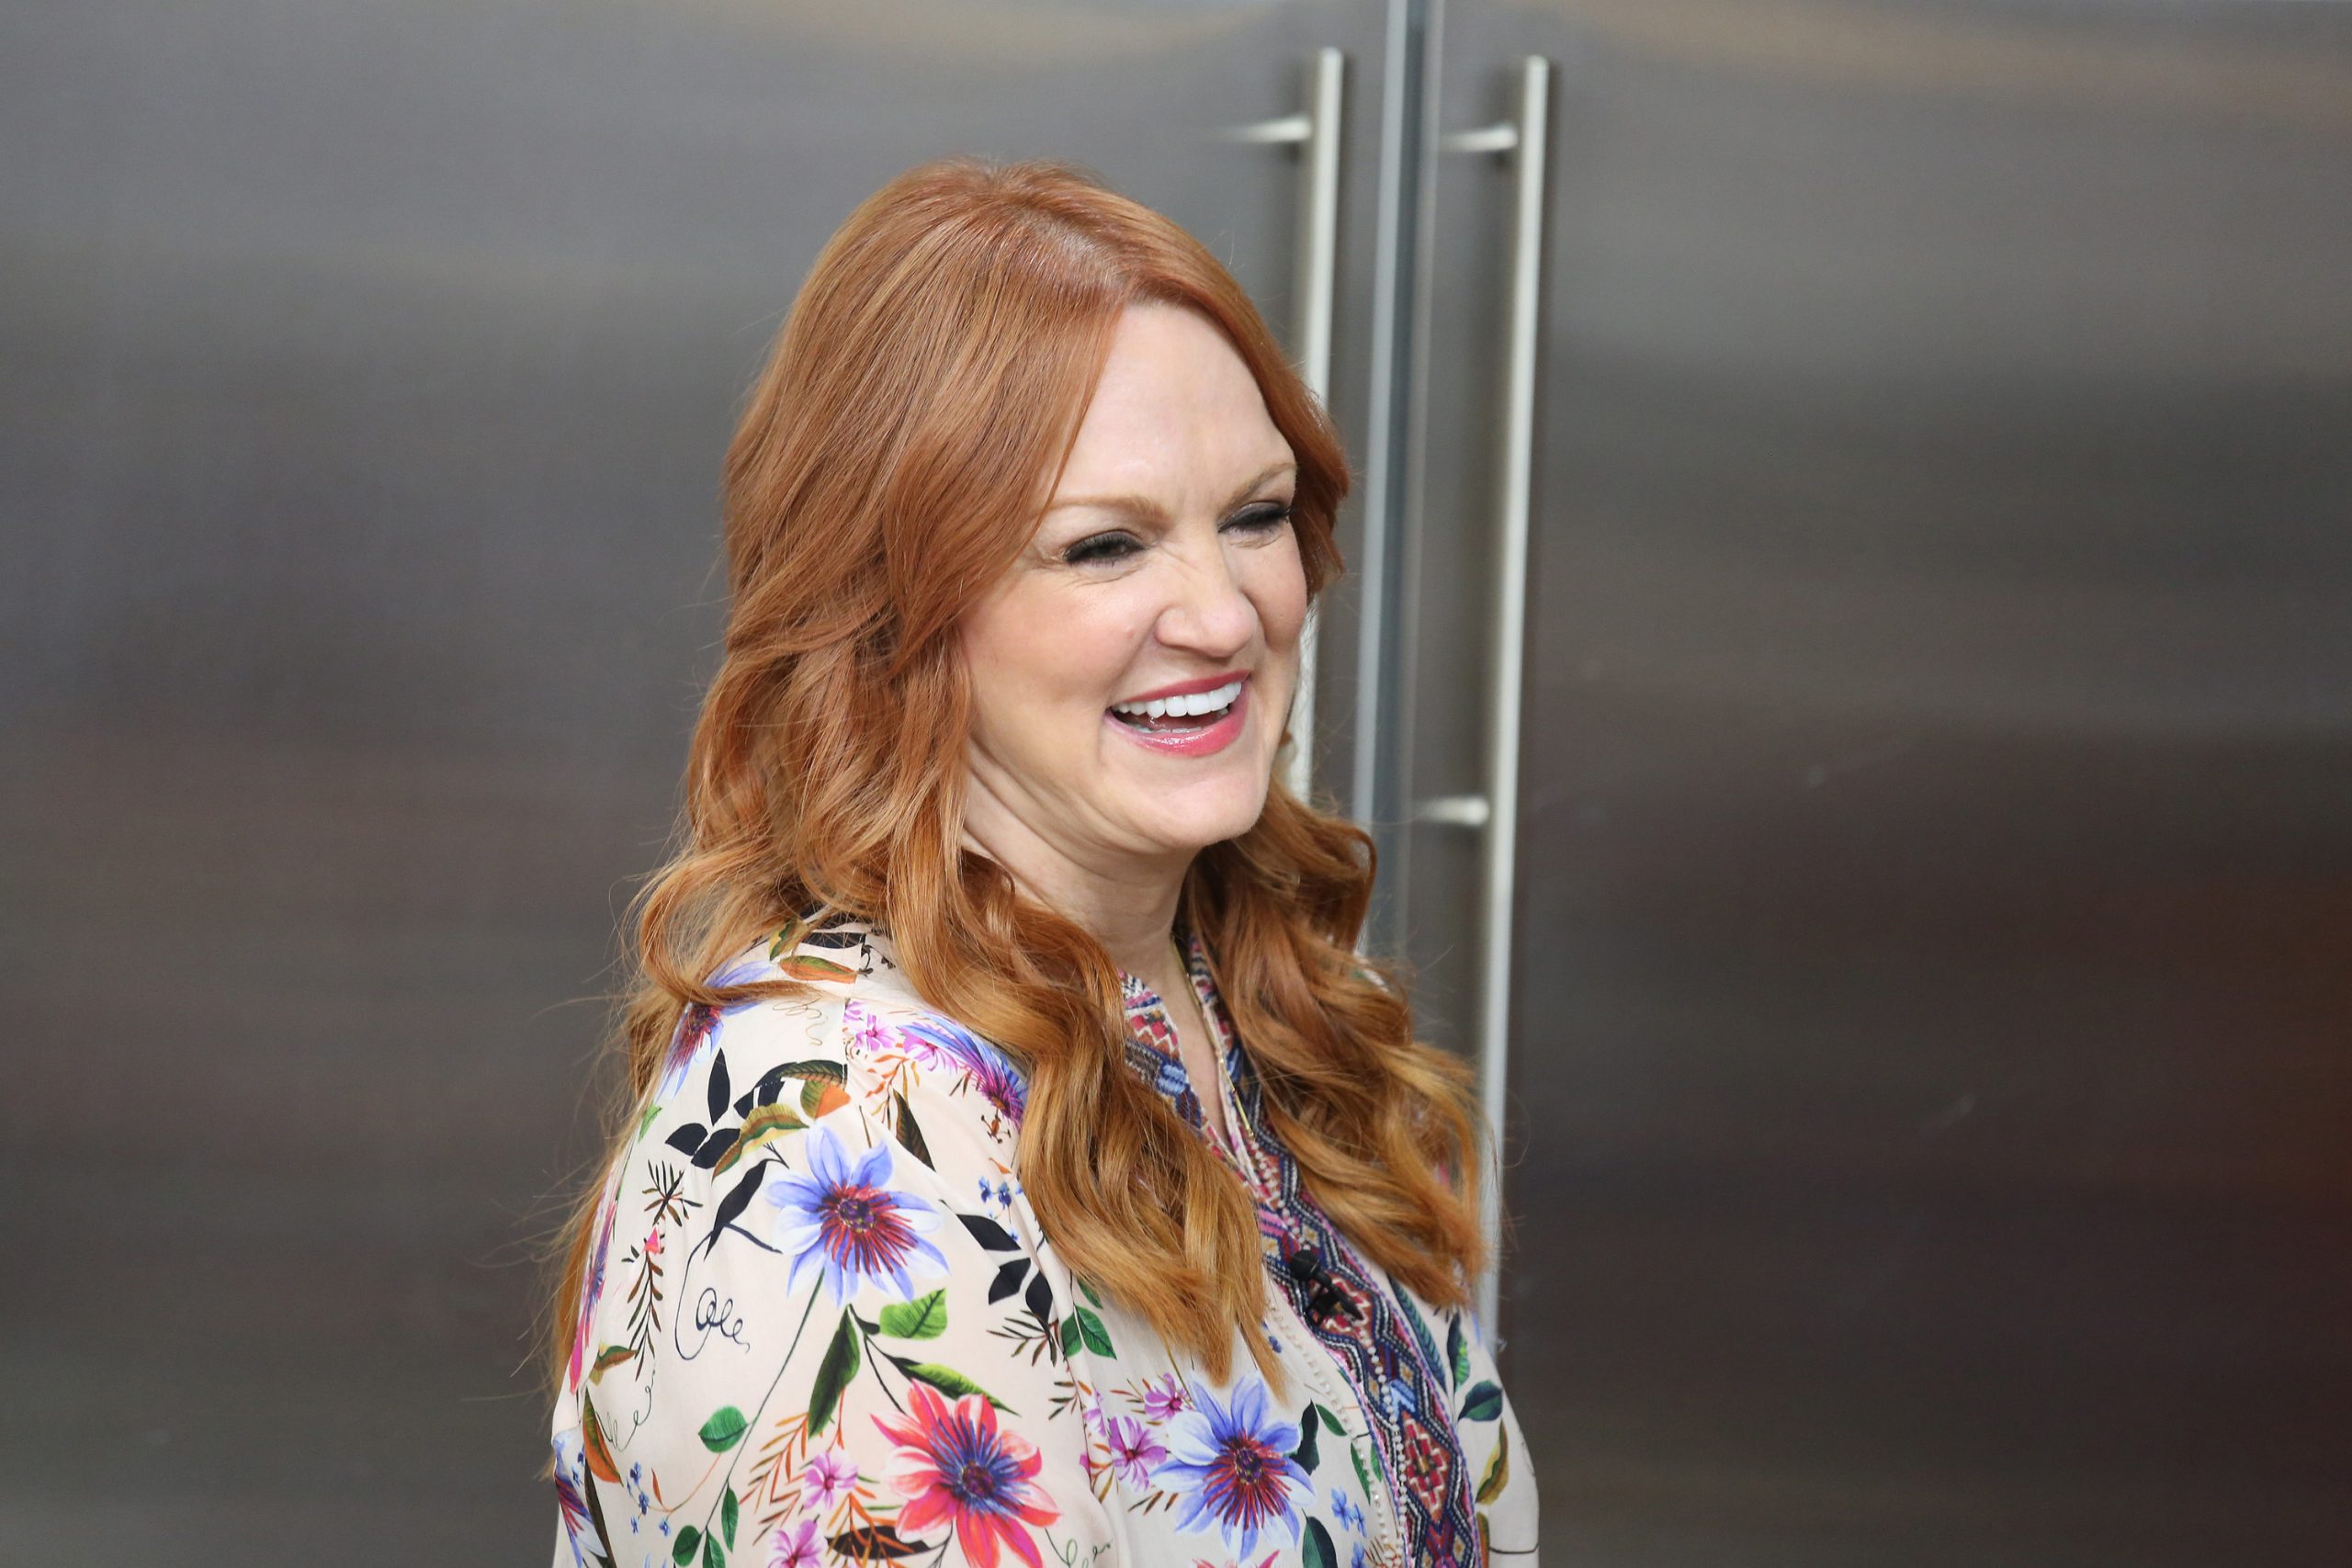 'The Pioneer Woman' star Ree Drummond smiles for the camera.